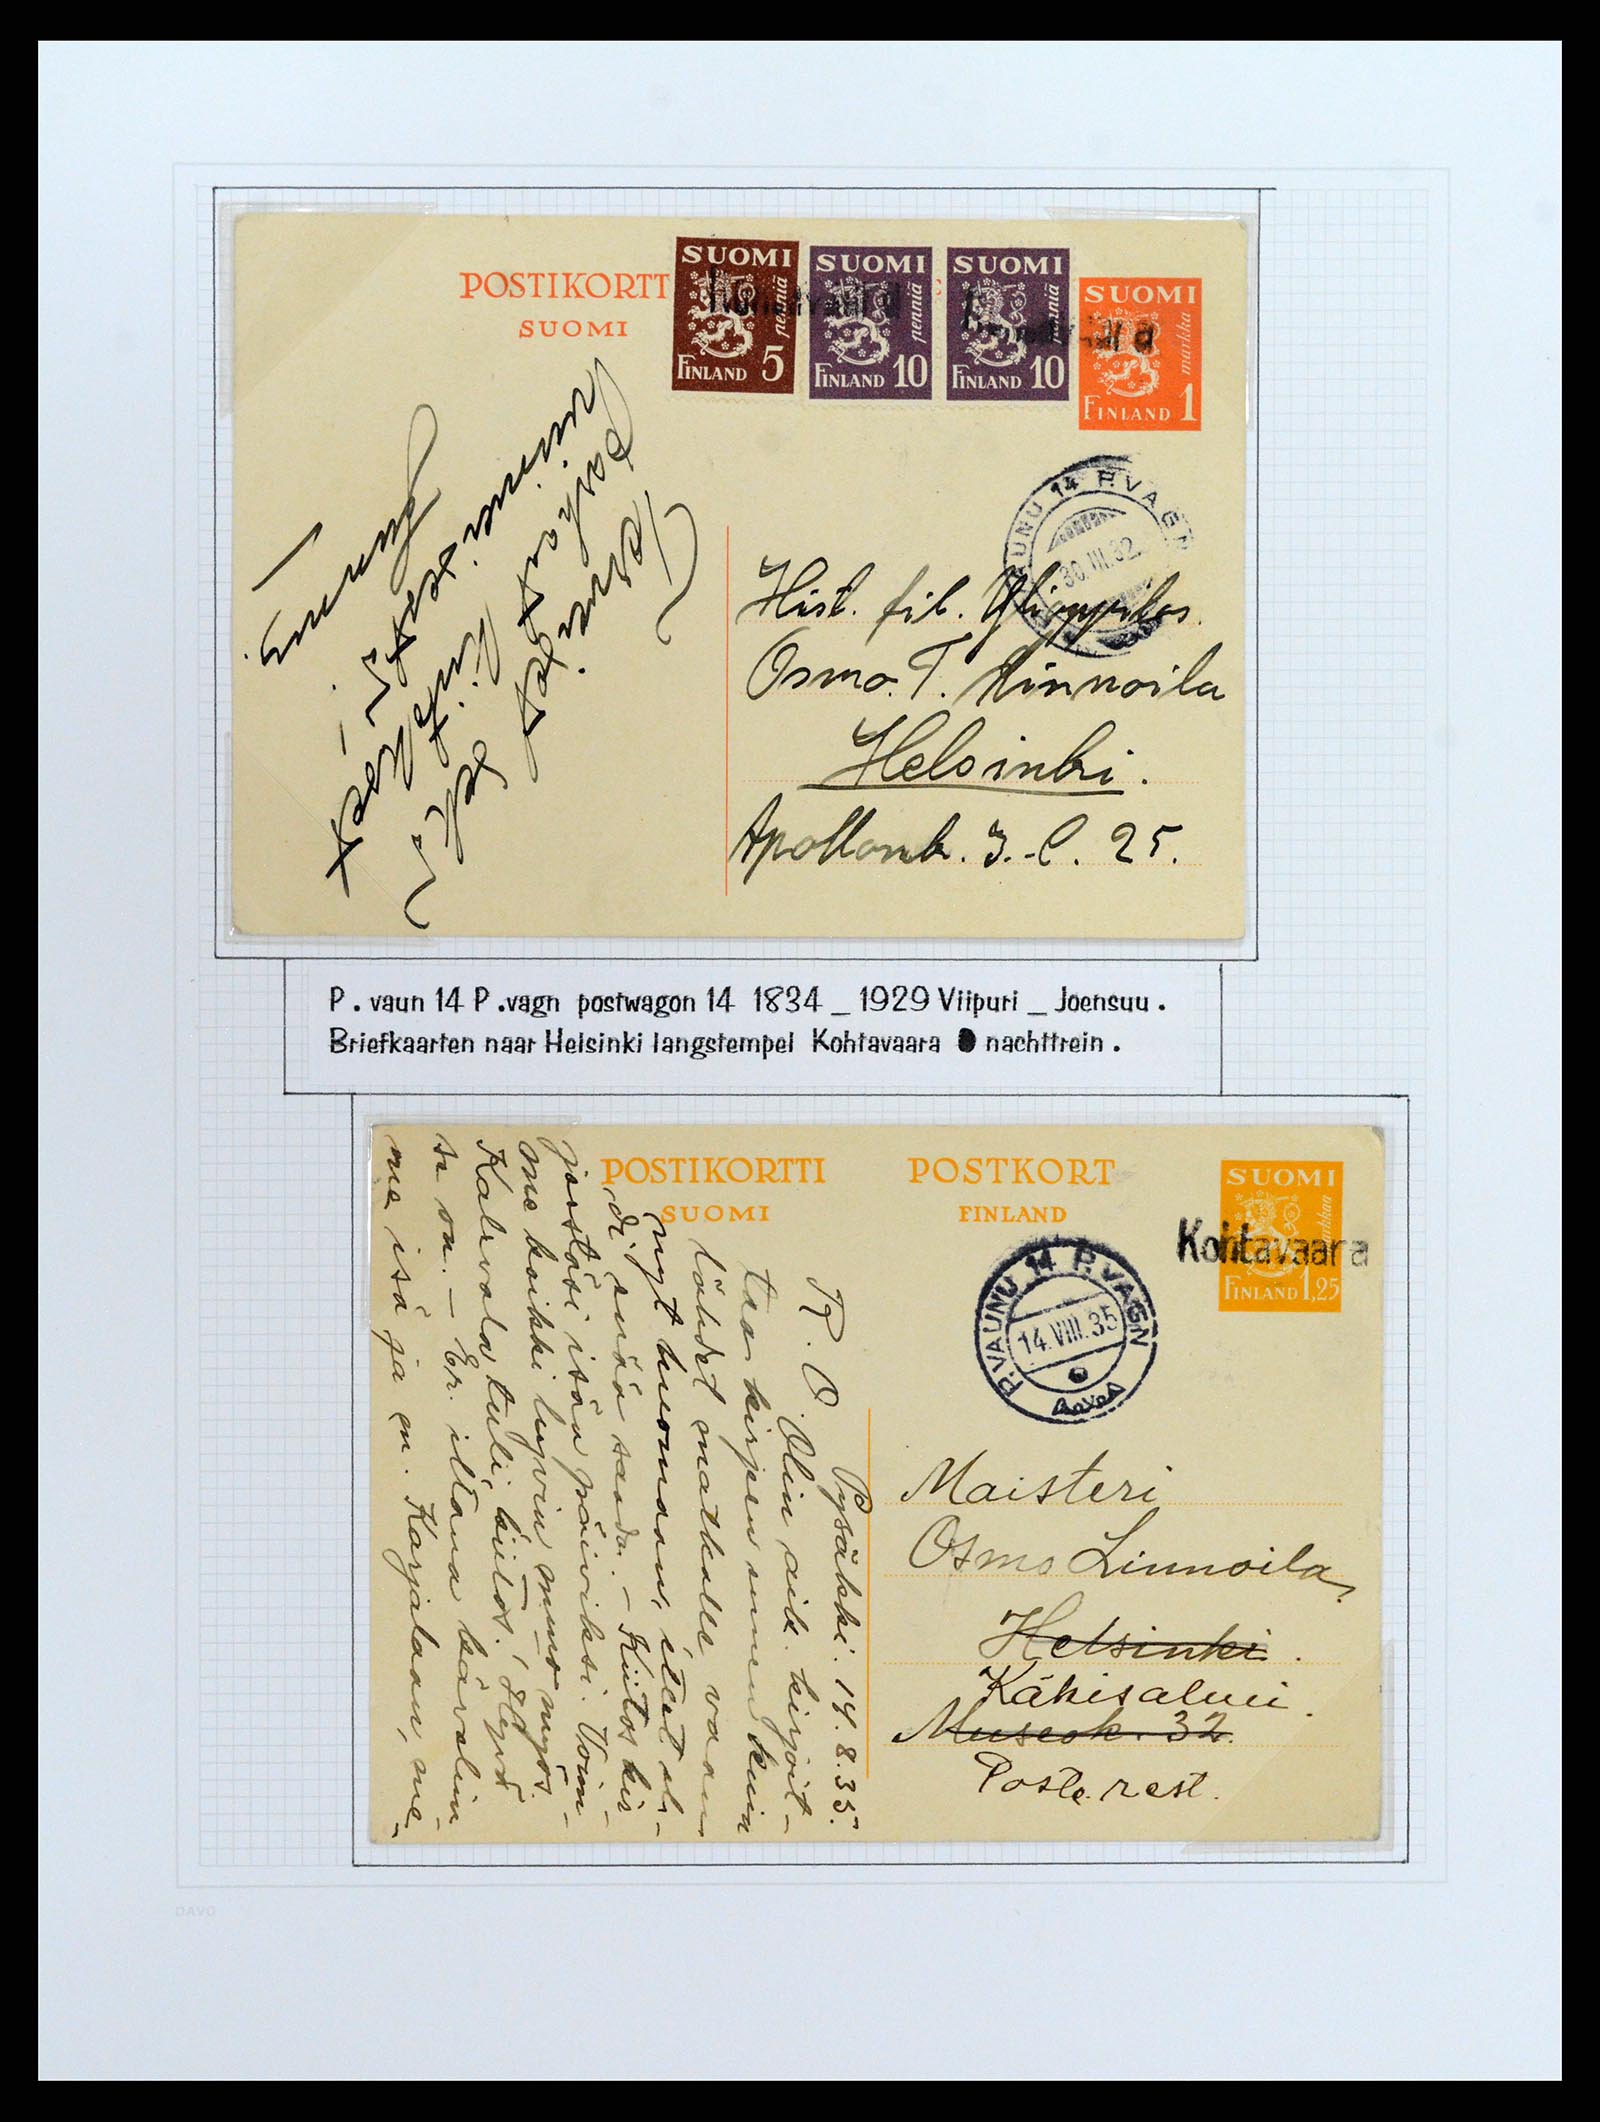 37766 071 - Stamp collection 37766 Finland railway cancellations 1870-1950.